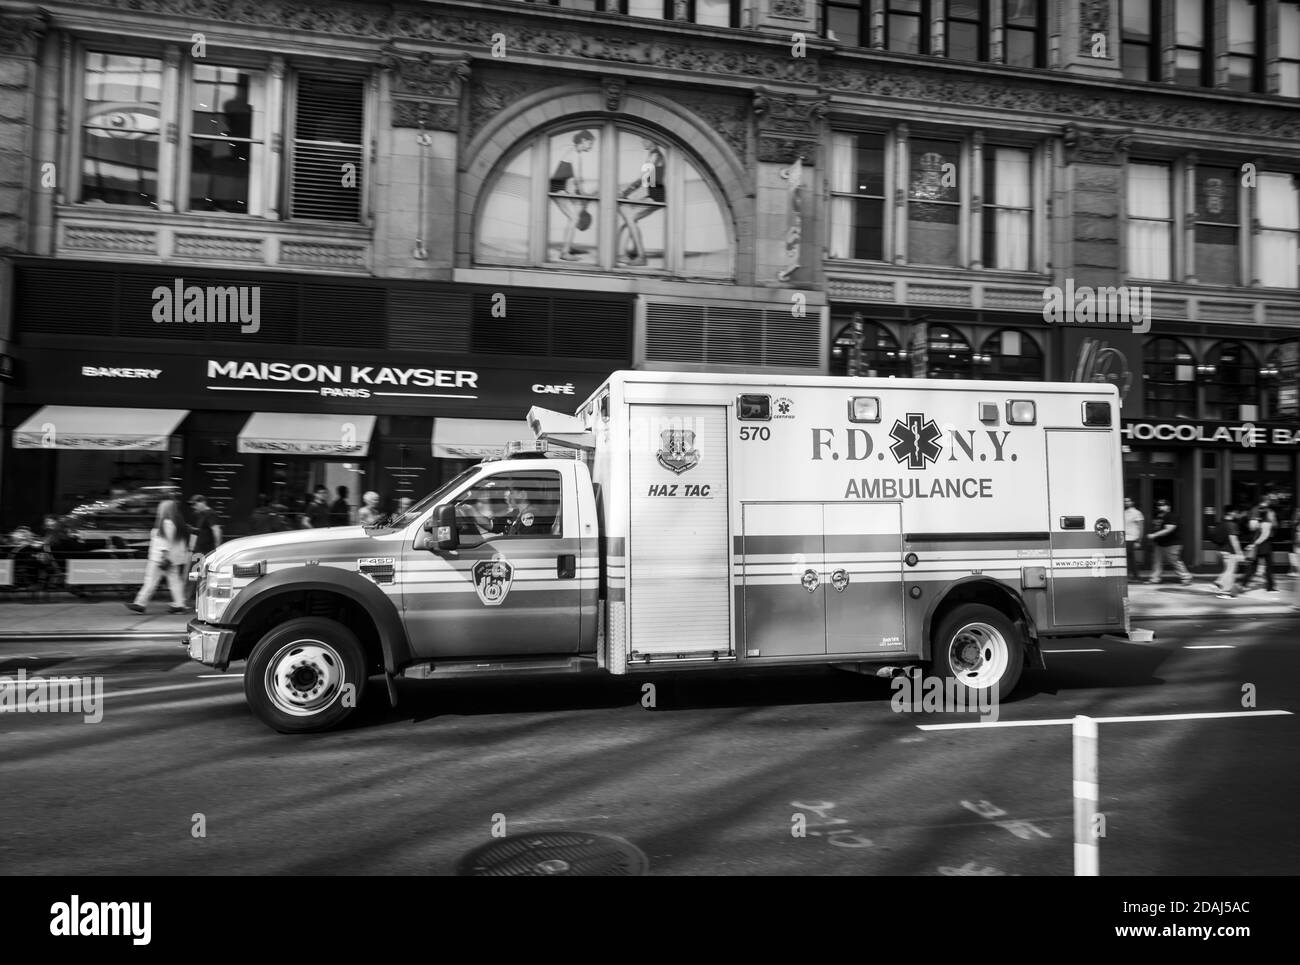 New York, USA - Sep 16, 2017: Black and white image of FDNY Ambulance car. FDNY is a department of the government of NYC and is the largest combined F Stock Photo